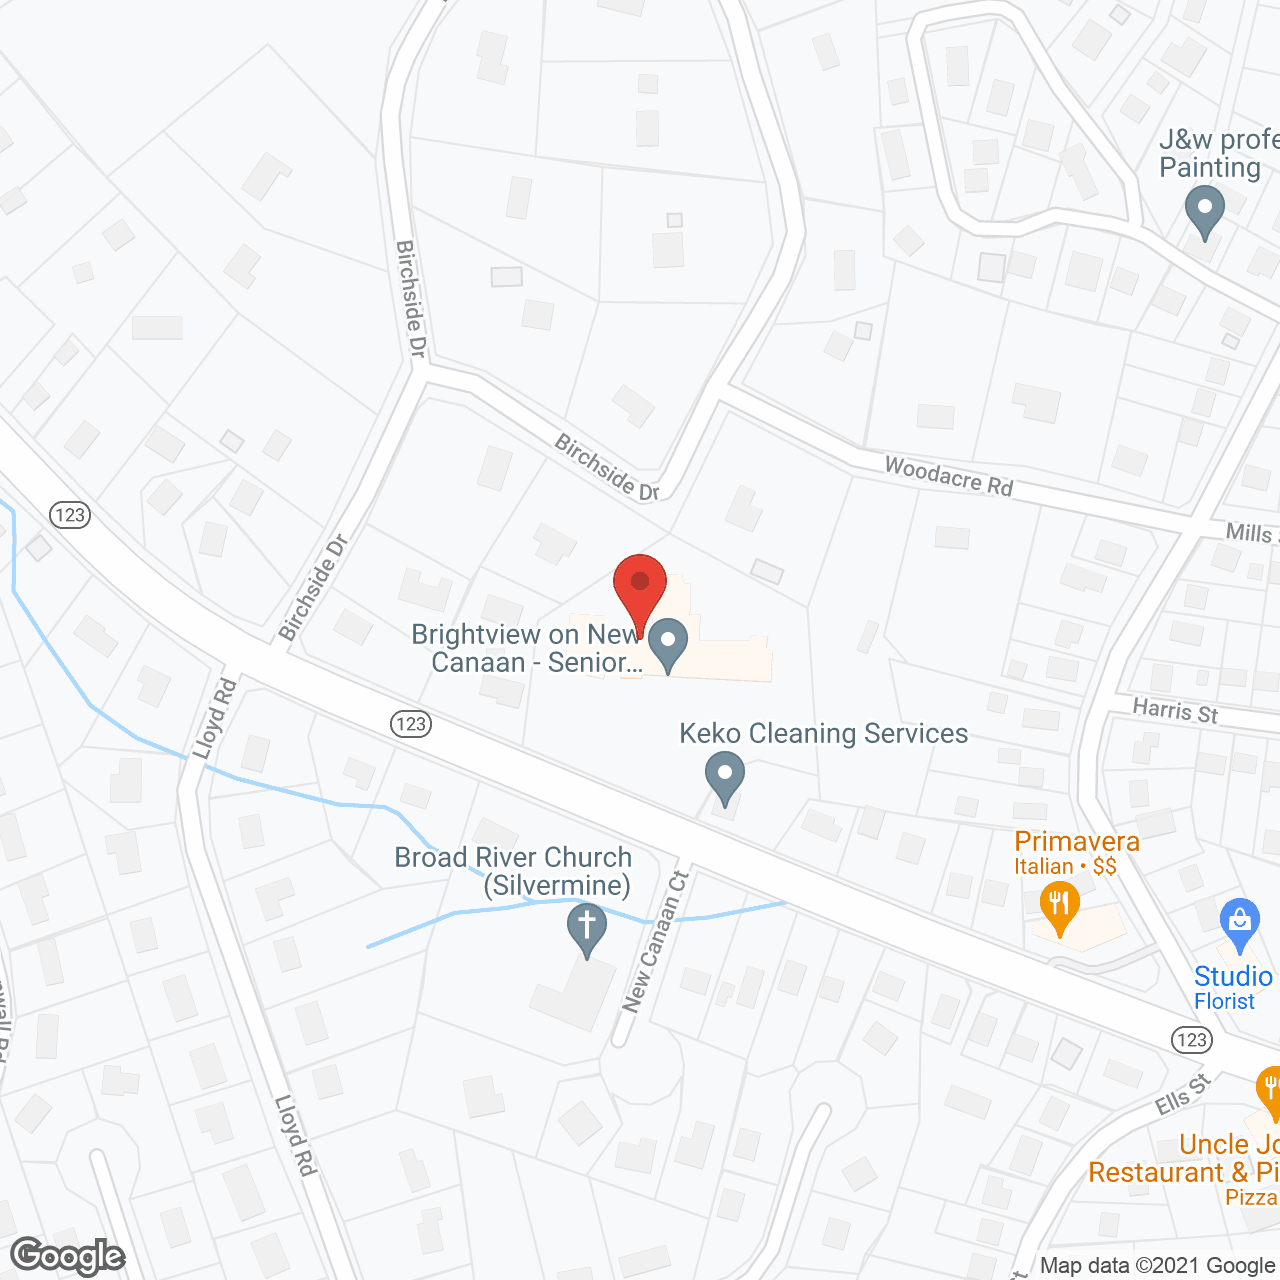 Brightview on New Canaan in google map